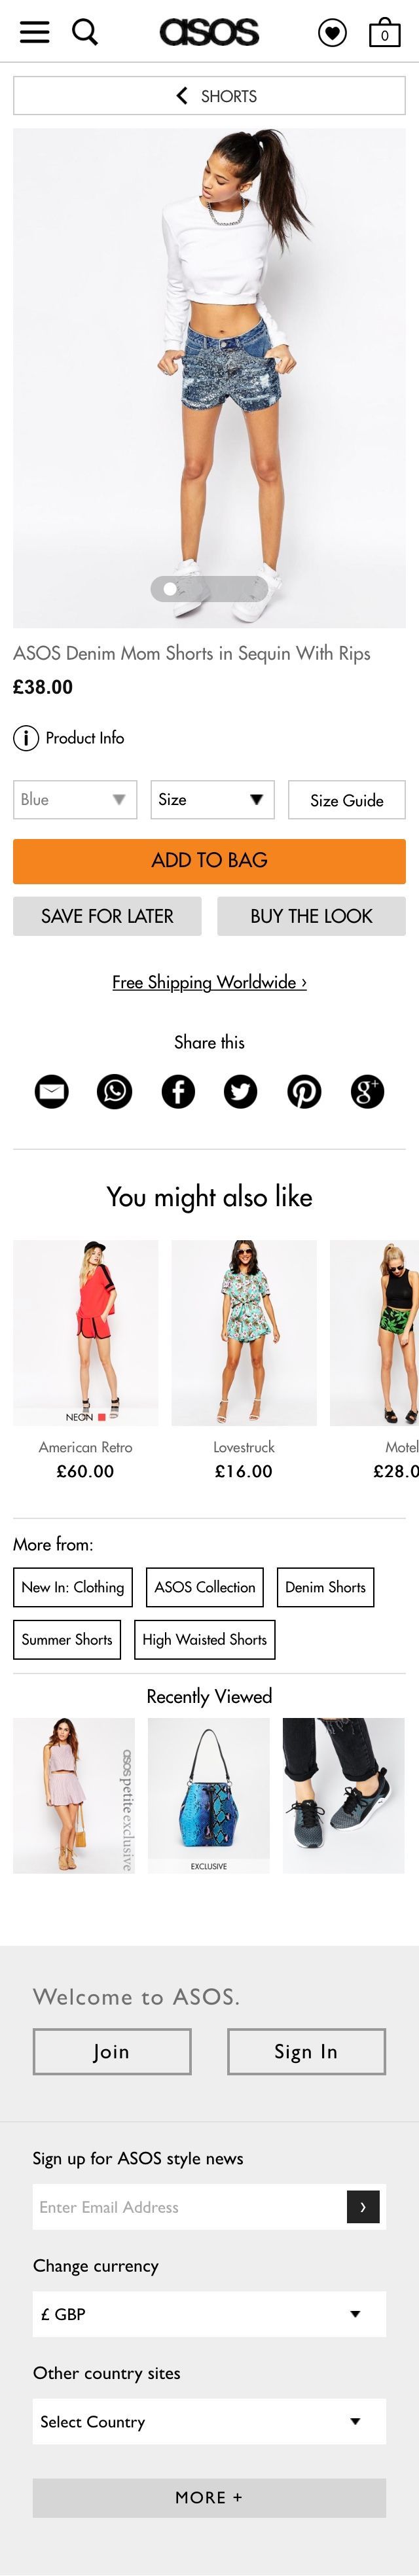 Asos mobile product page design example